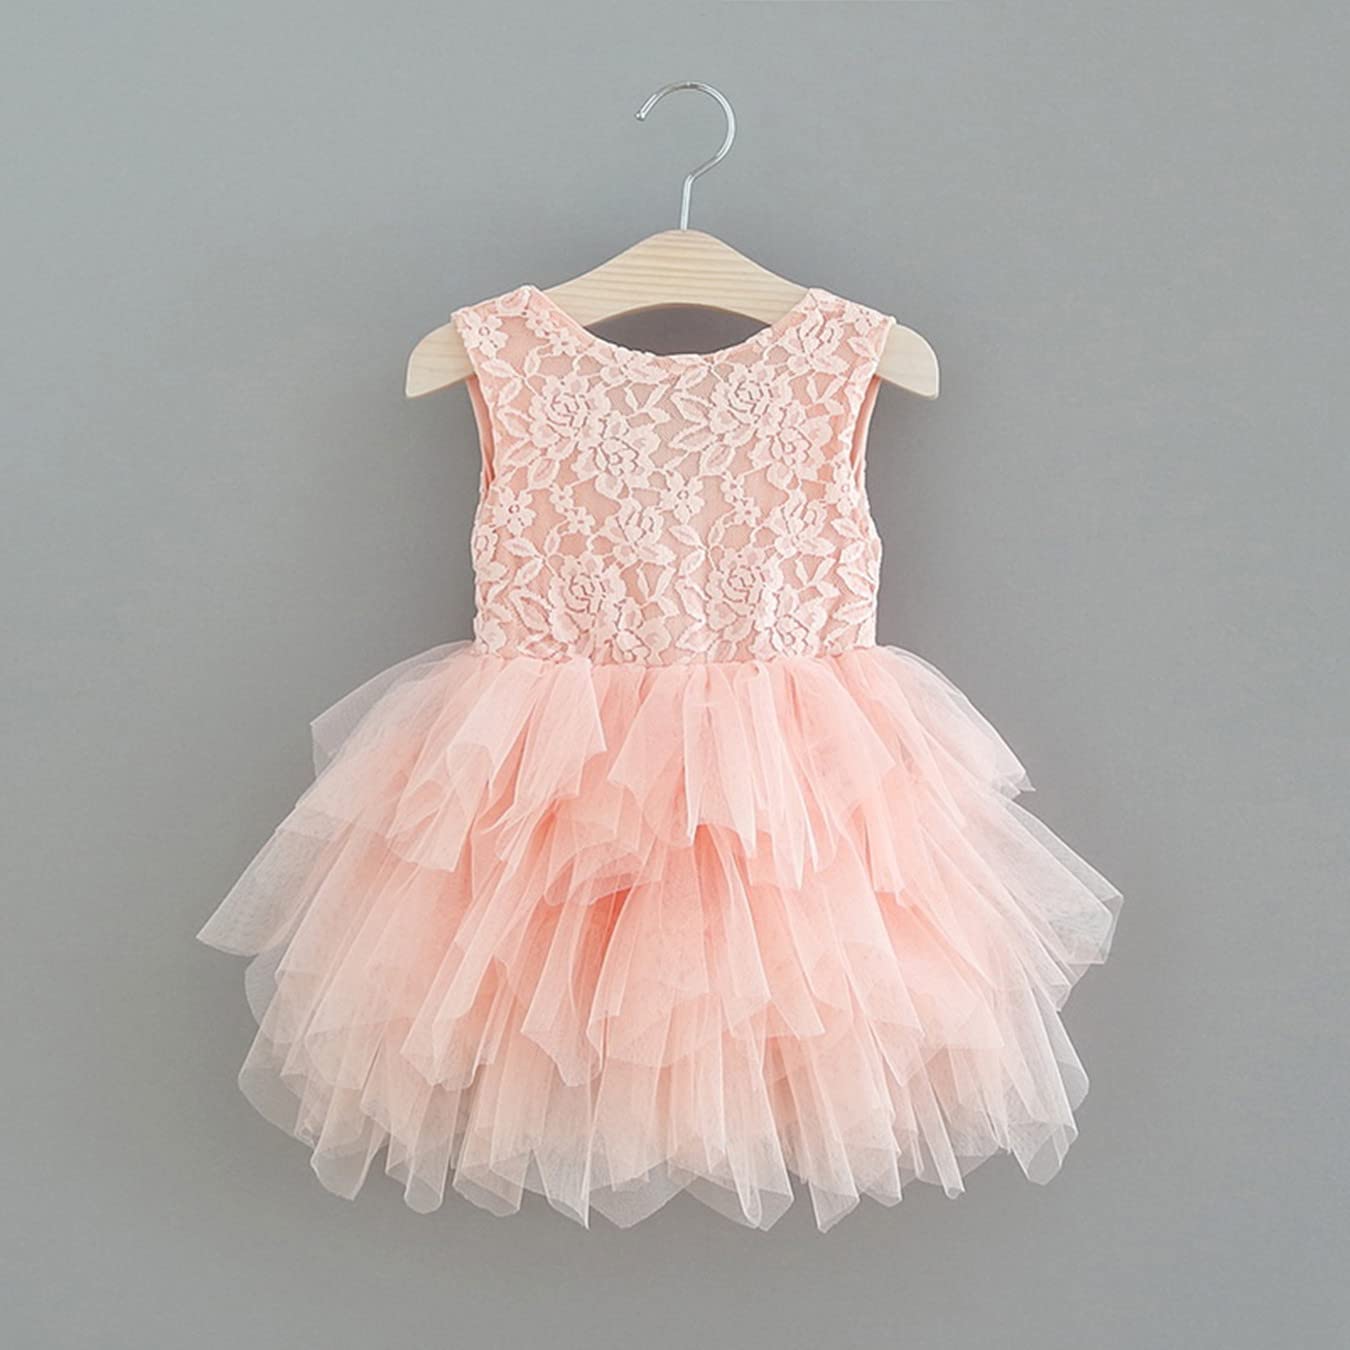 Silk Bow Lace Tiered Tulle Girl Dress in Pink - 2BUNNIES